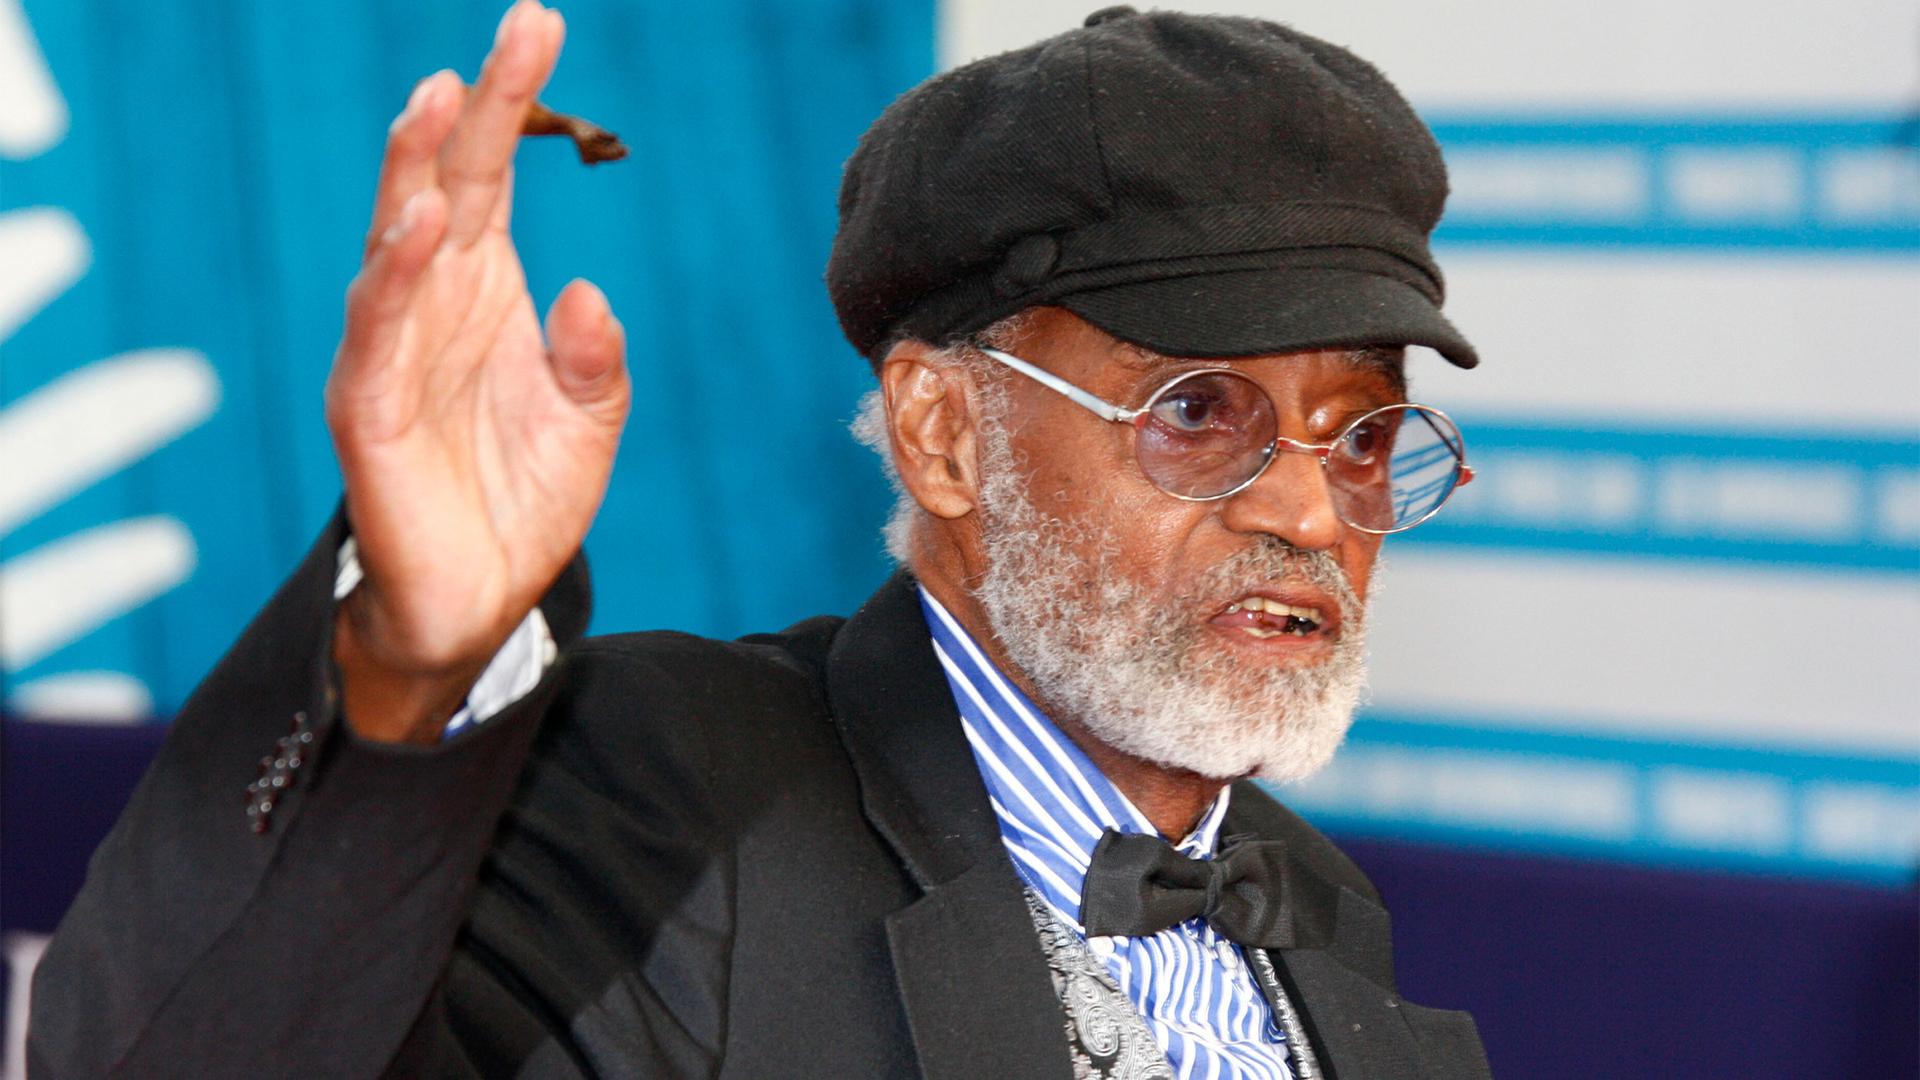 US director, actor, screenwriter Melvin Van Peebles is seen during a tribute for his career at the 38th American Film Festival in Deauville, Normandy, France